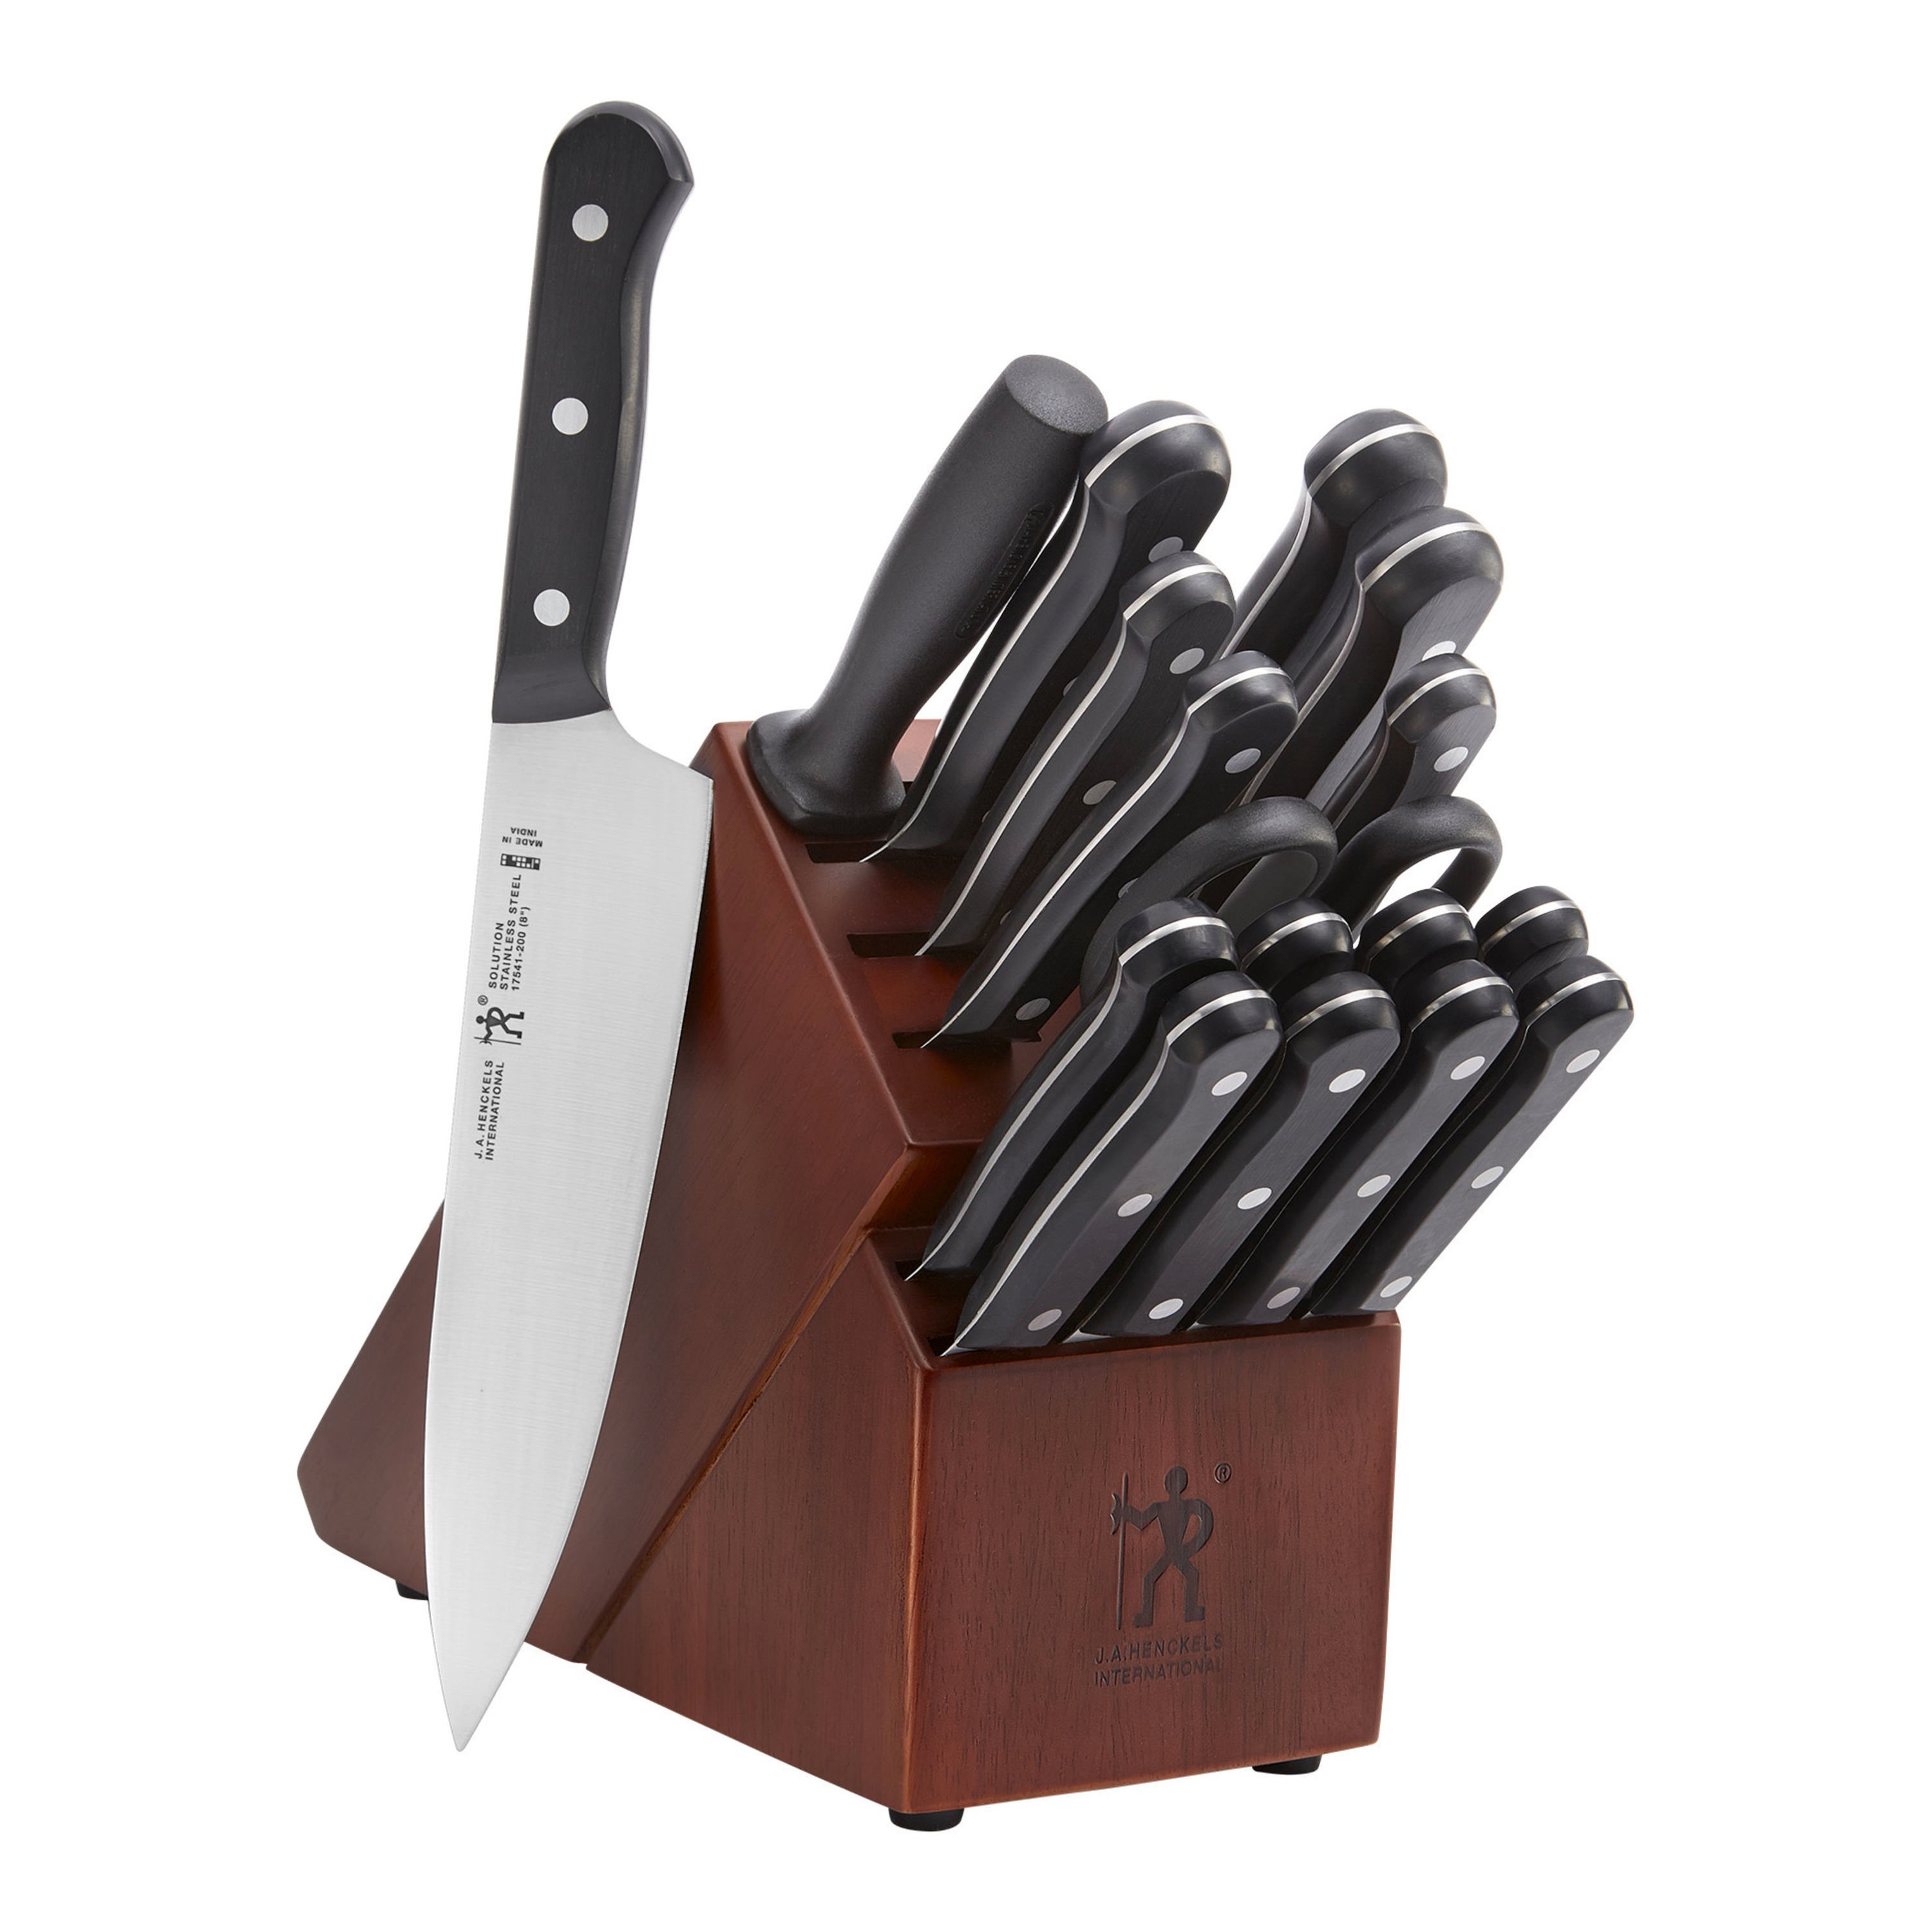 Gordon Ramsay Everyday Chef Knives 8 Piece Block Set Review